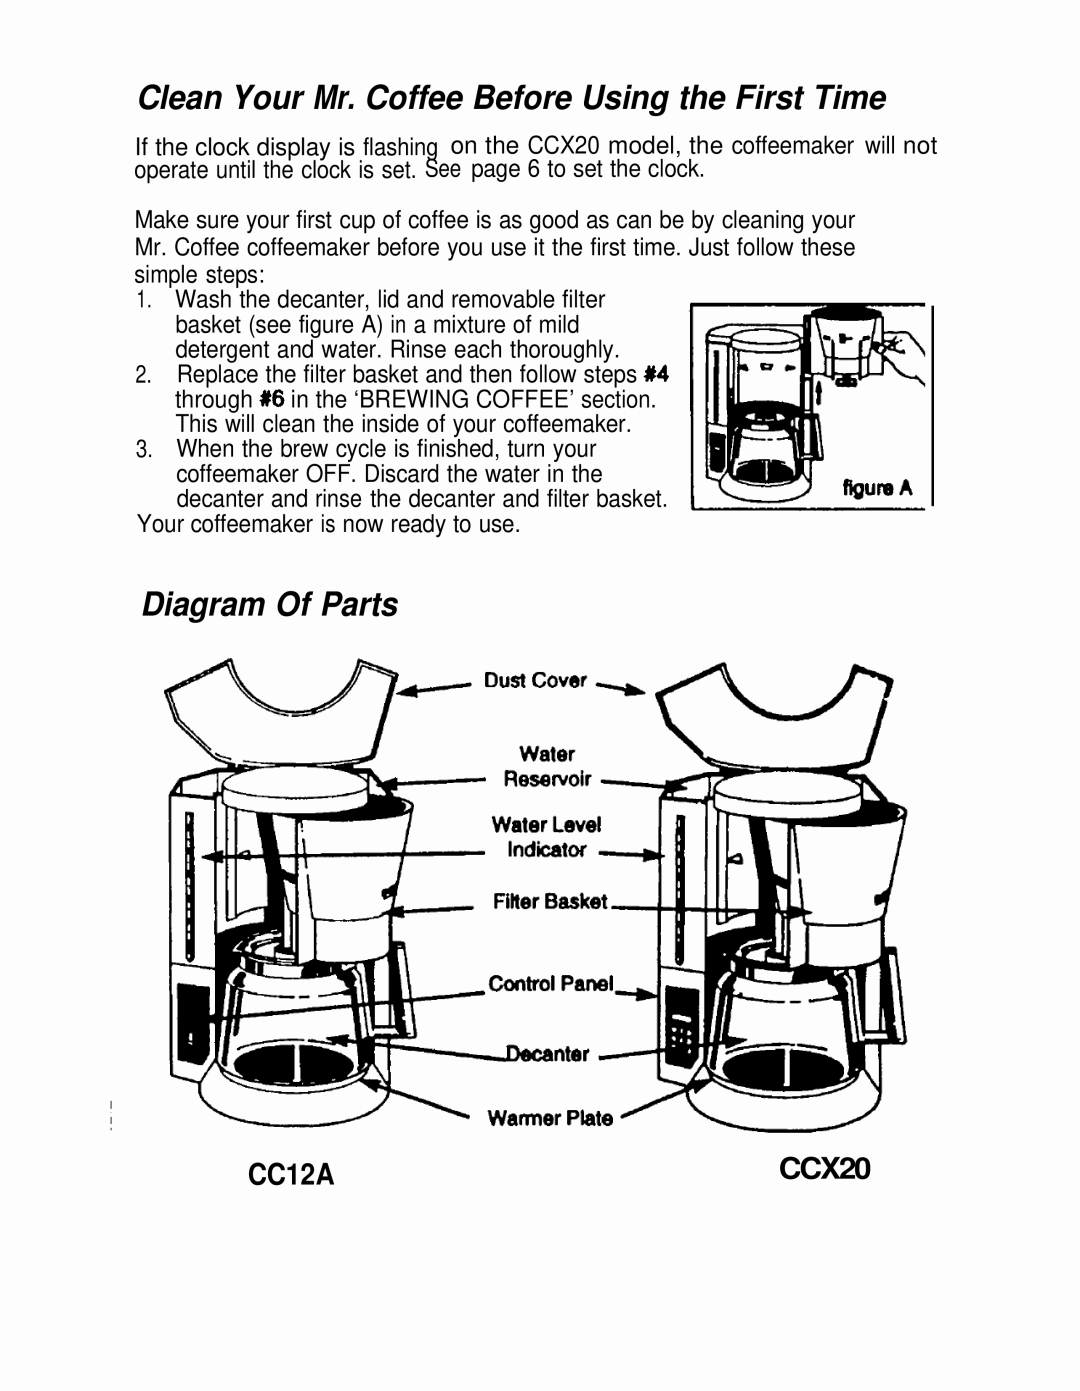 Mr. Coffee manual Clean Your Mr. Coffee Before Using the First Time, Diagram Of Parts, CC12ACCX20 